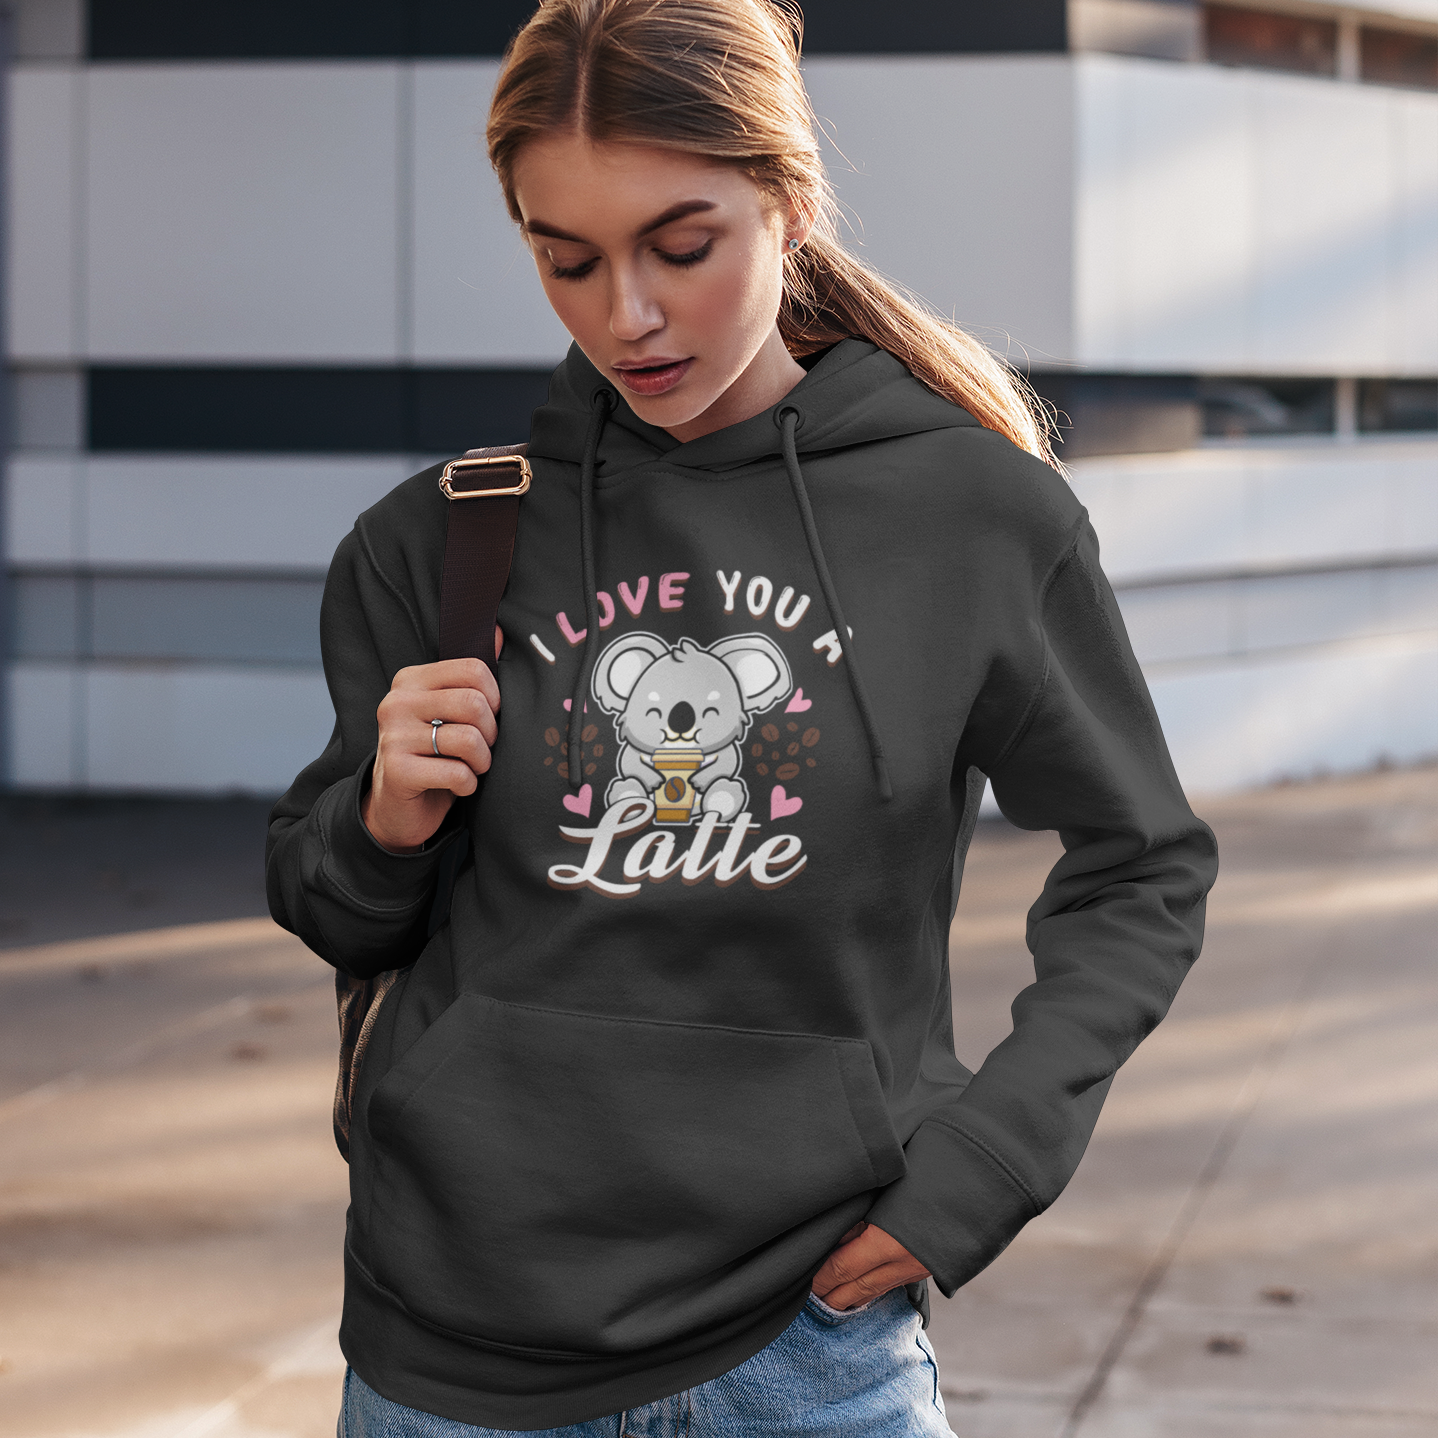 I Love You a Latte Unisex Hoodie